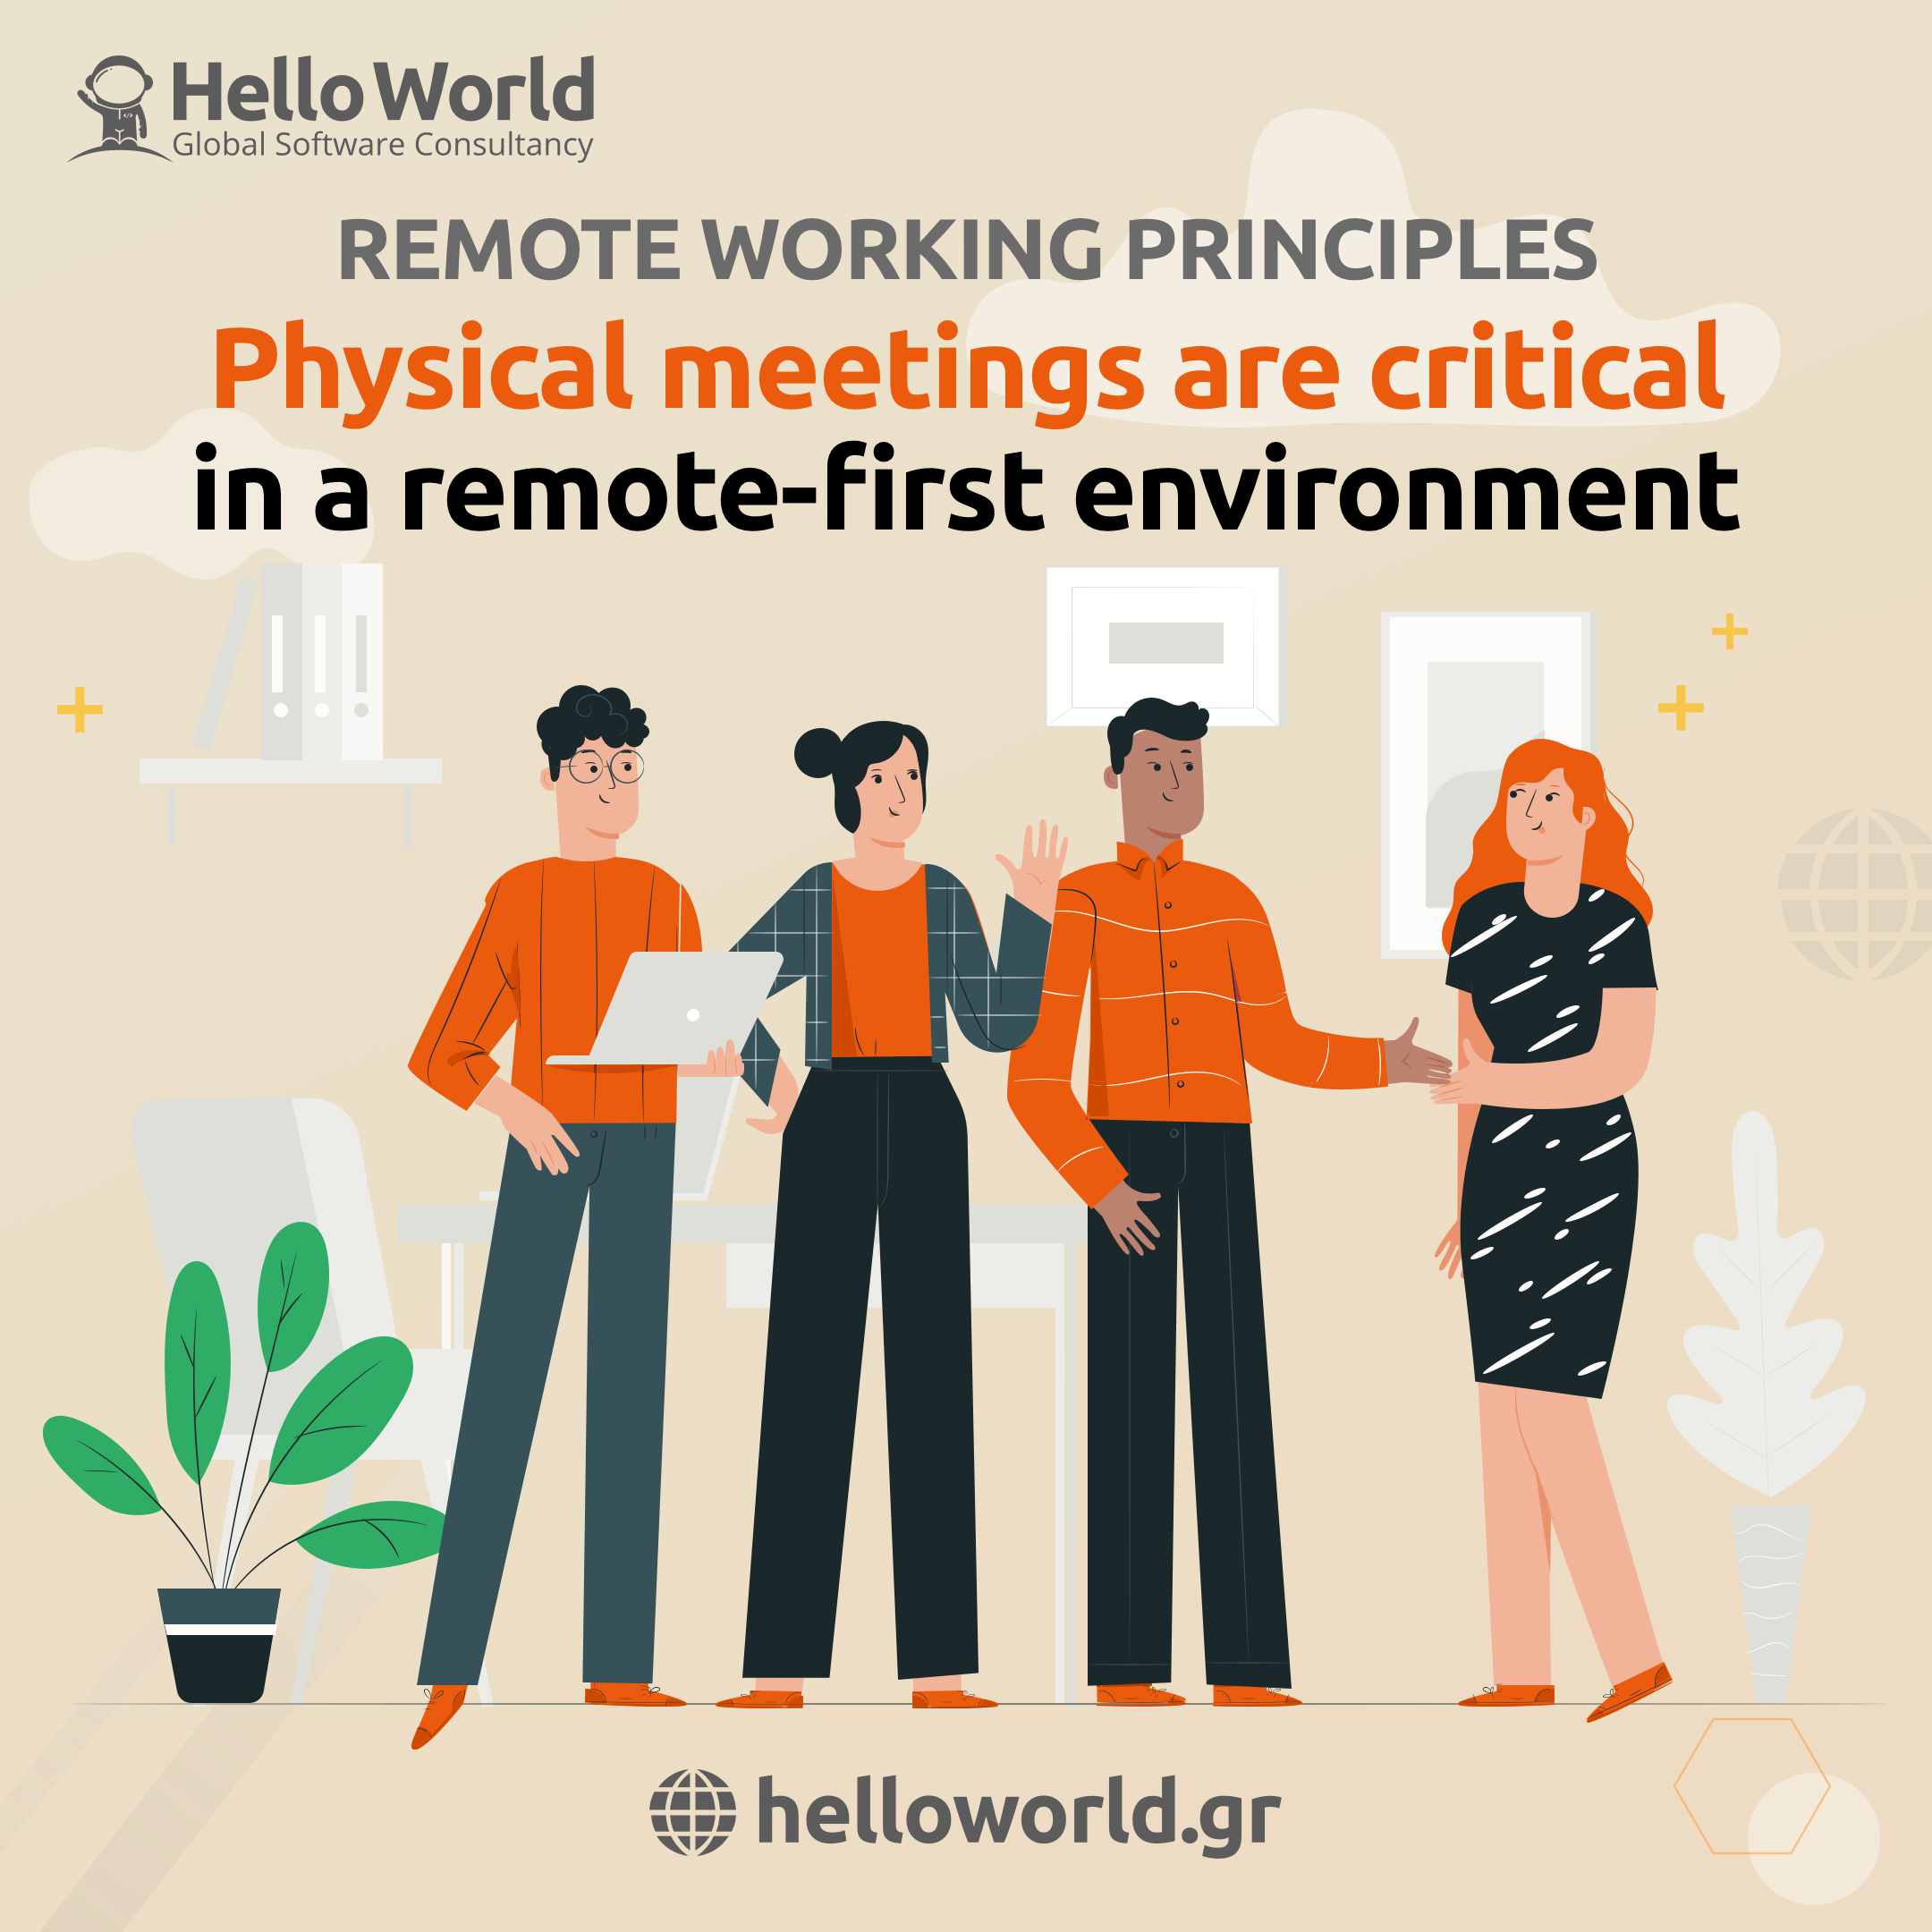 Physical meetings are critical in a remote-first environment